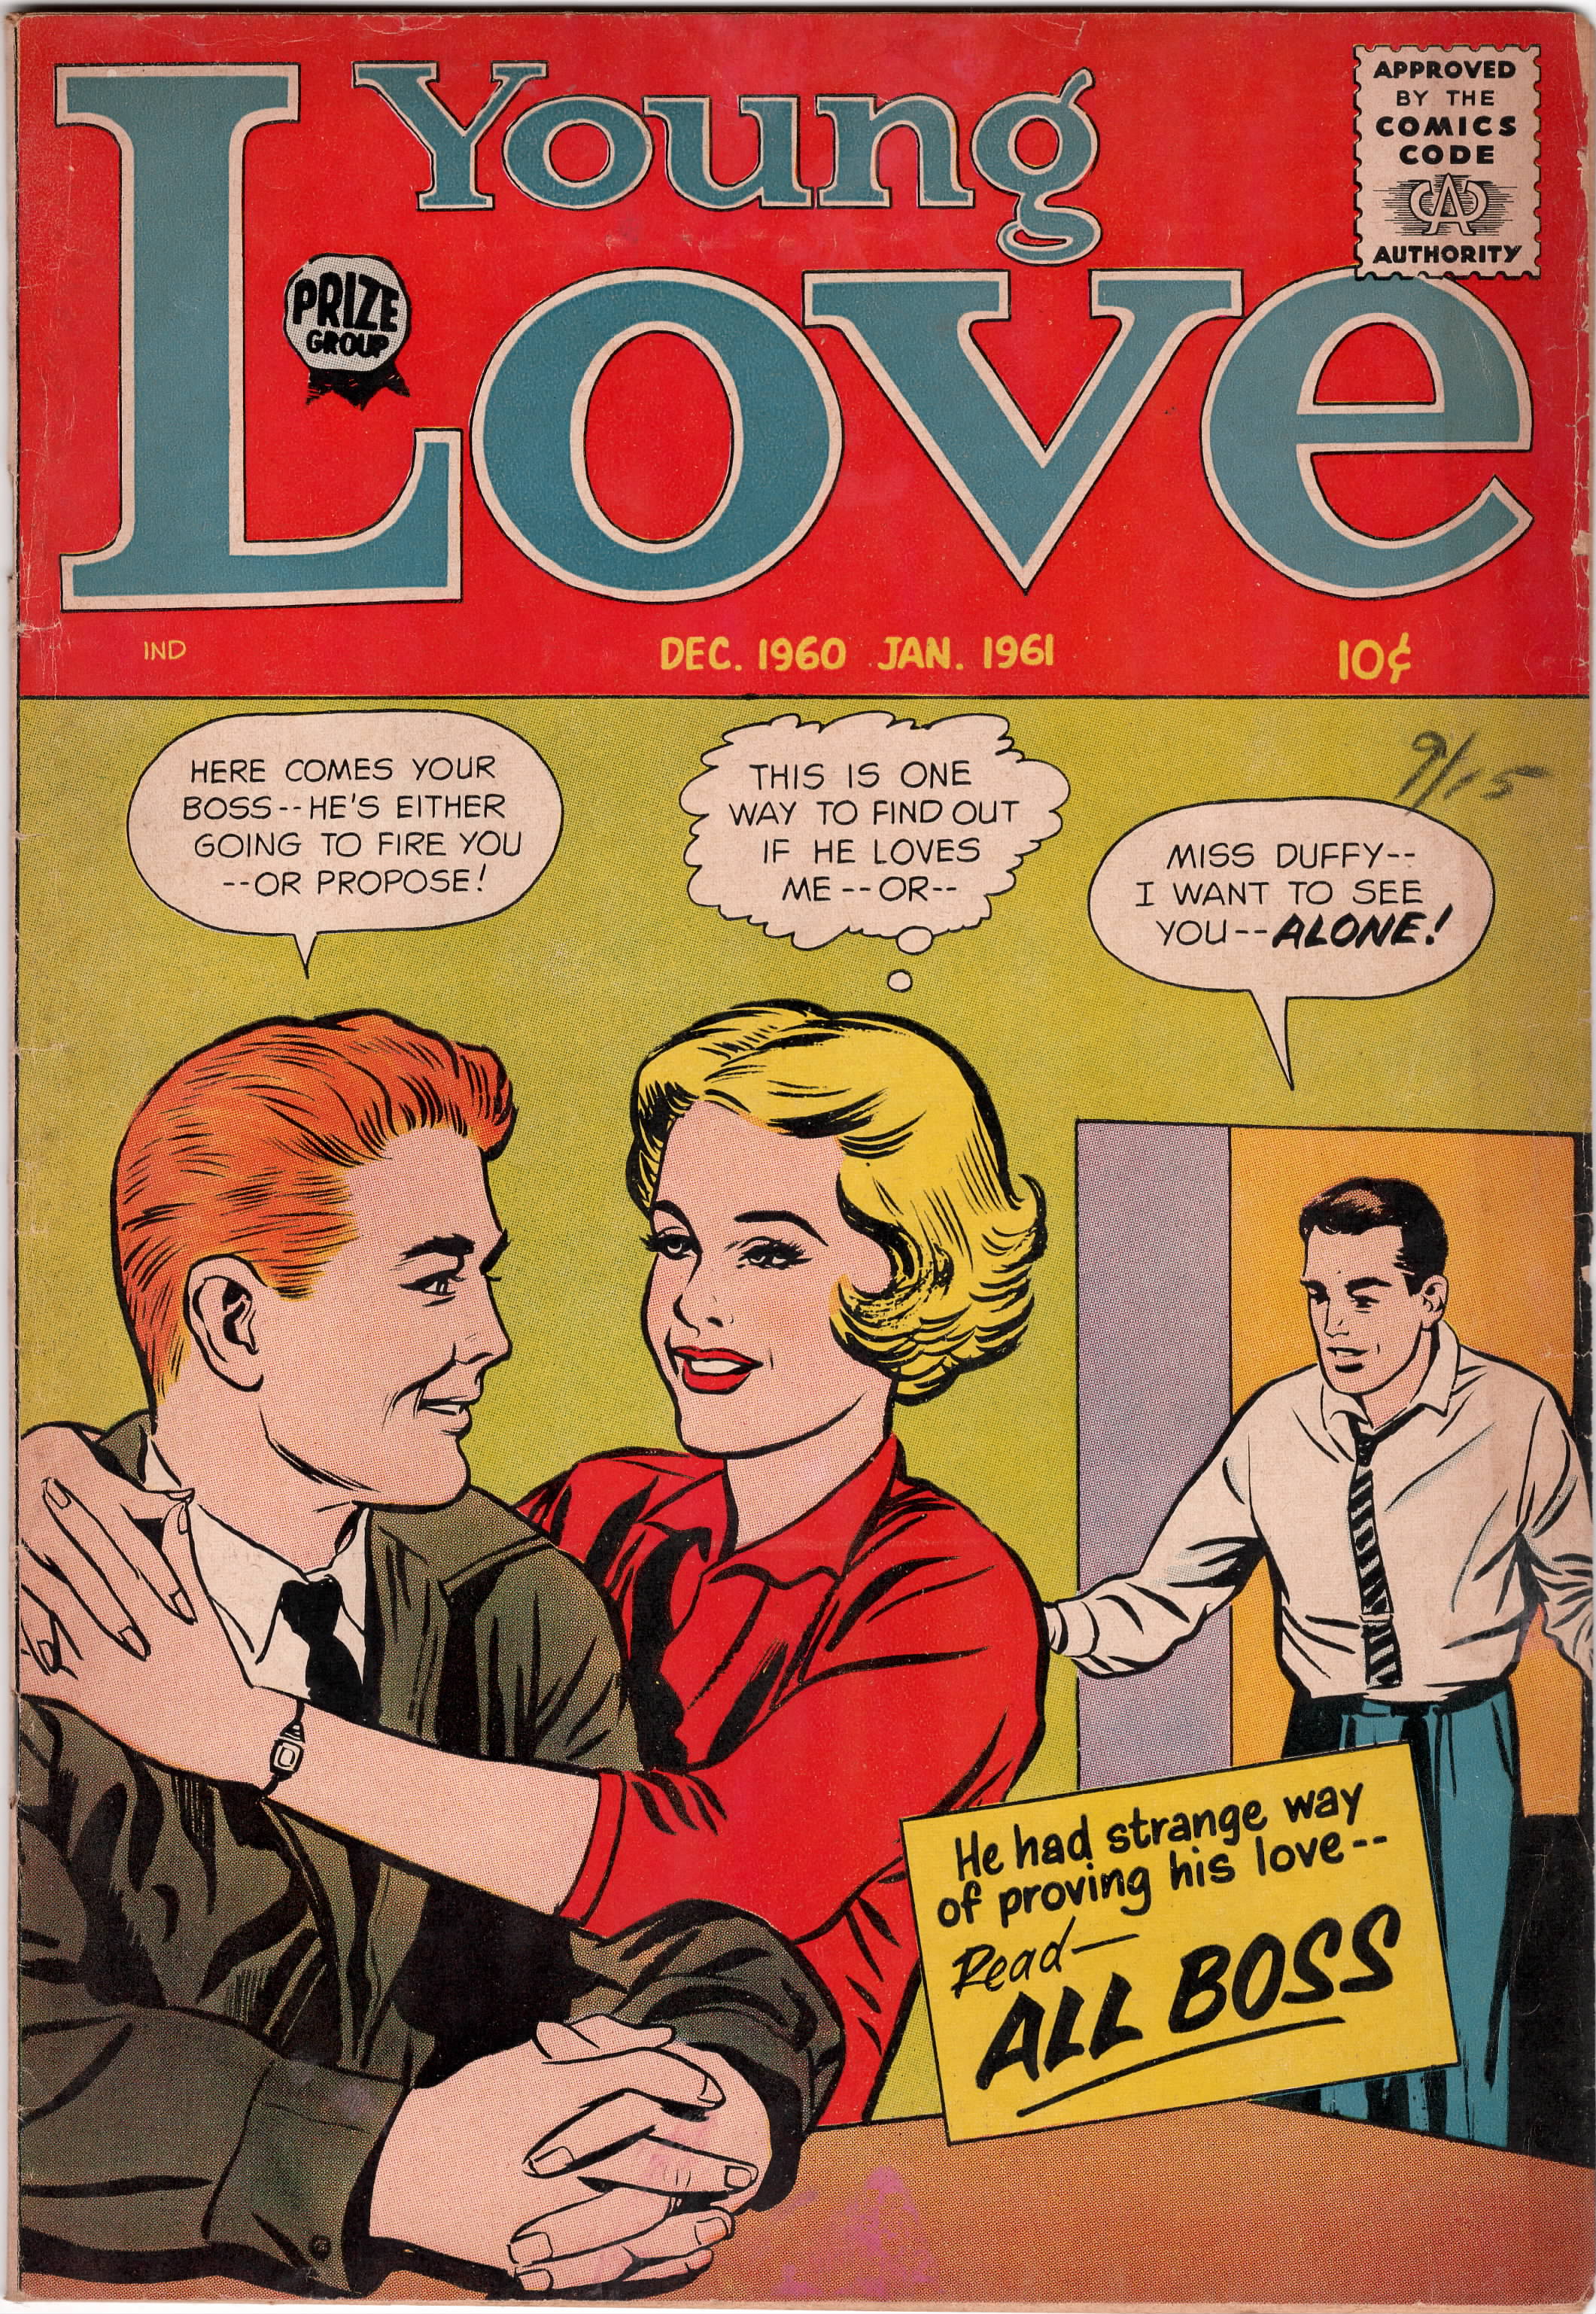 Young Love (Vol 4) #4